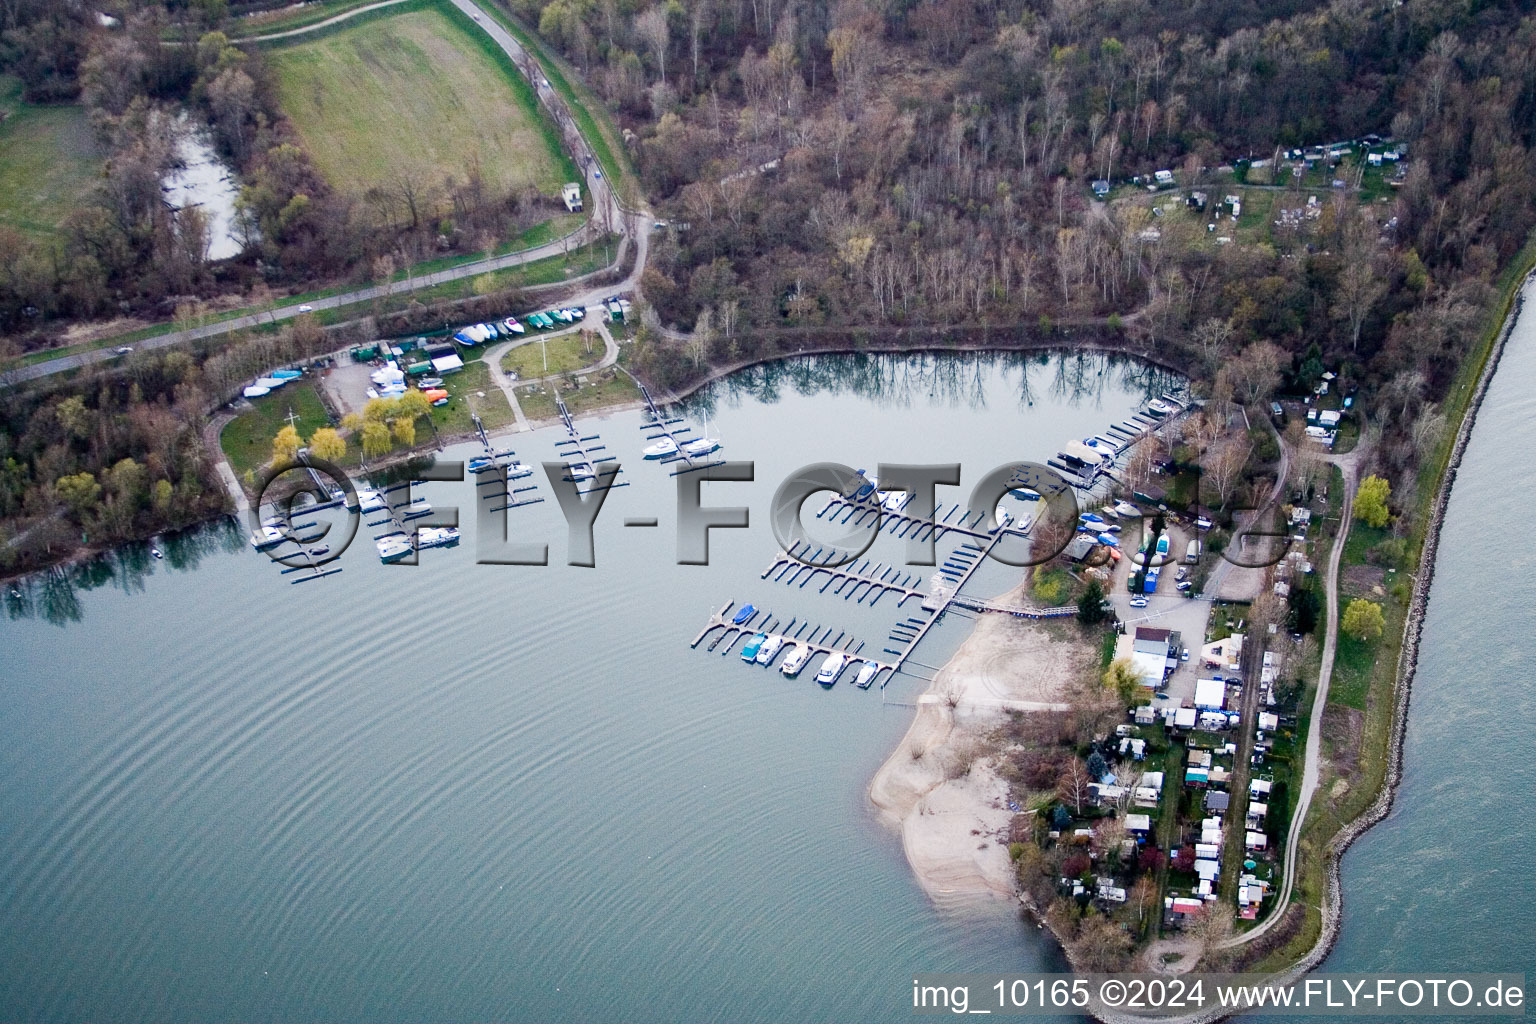 Lakes and beach areas on the recreation area Blaue Adria in the district Riedsiedlung in Altrip in the state Rhineland-Palatinate from above